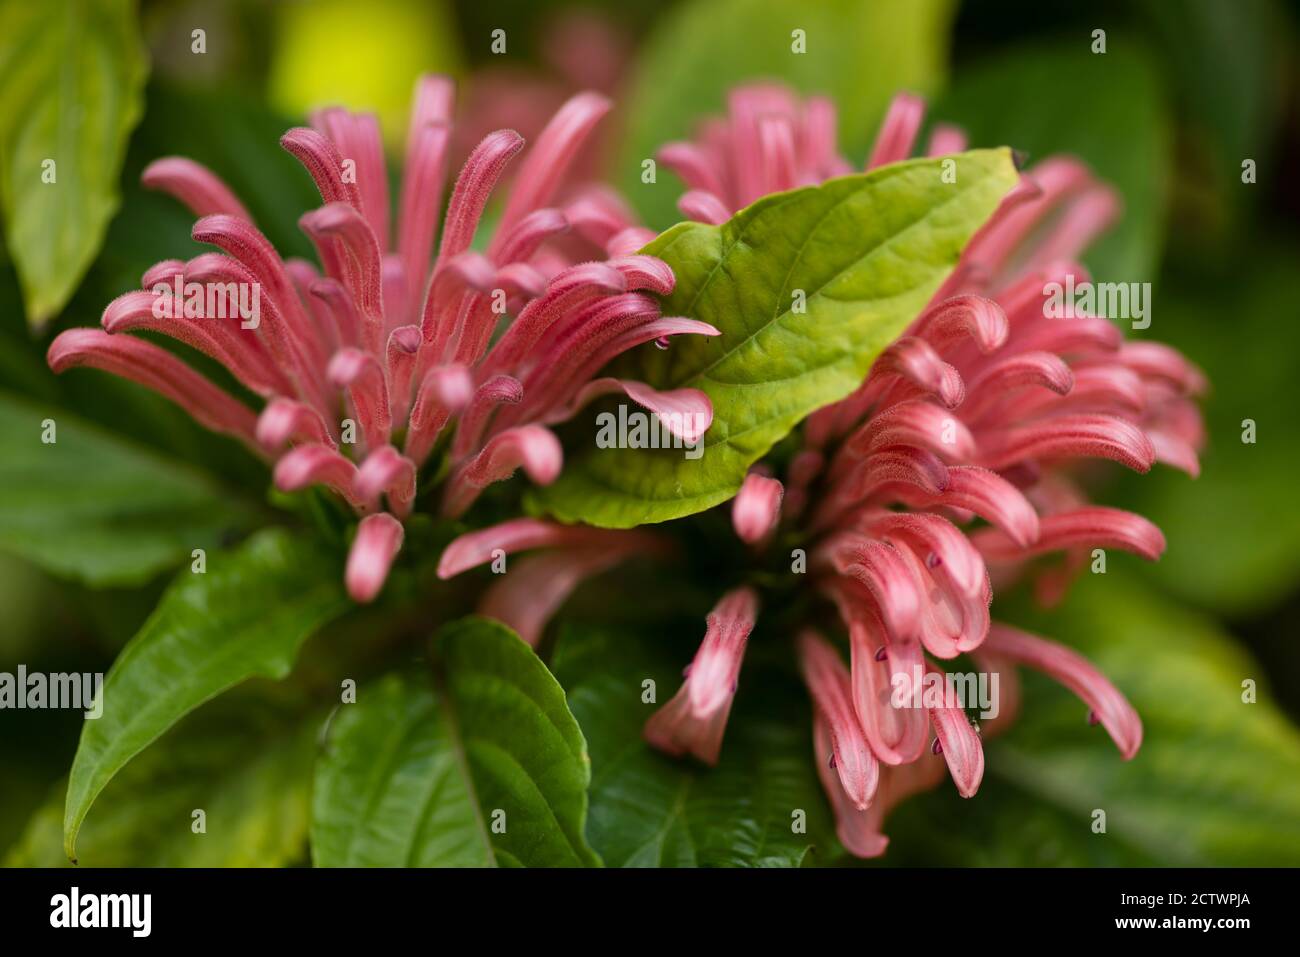 Justicia carnea, Brazilian plume, flamingo flower, and jacobinia,  flowering plant in the family Acanthaceae Stock Photo